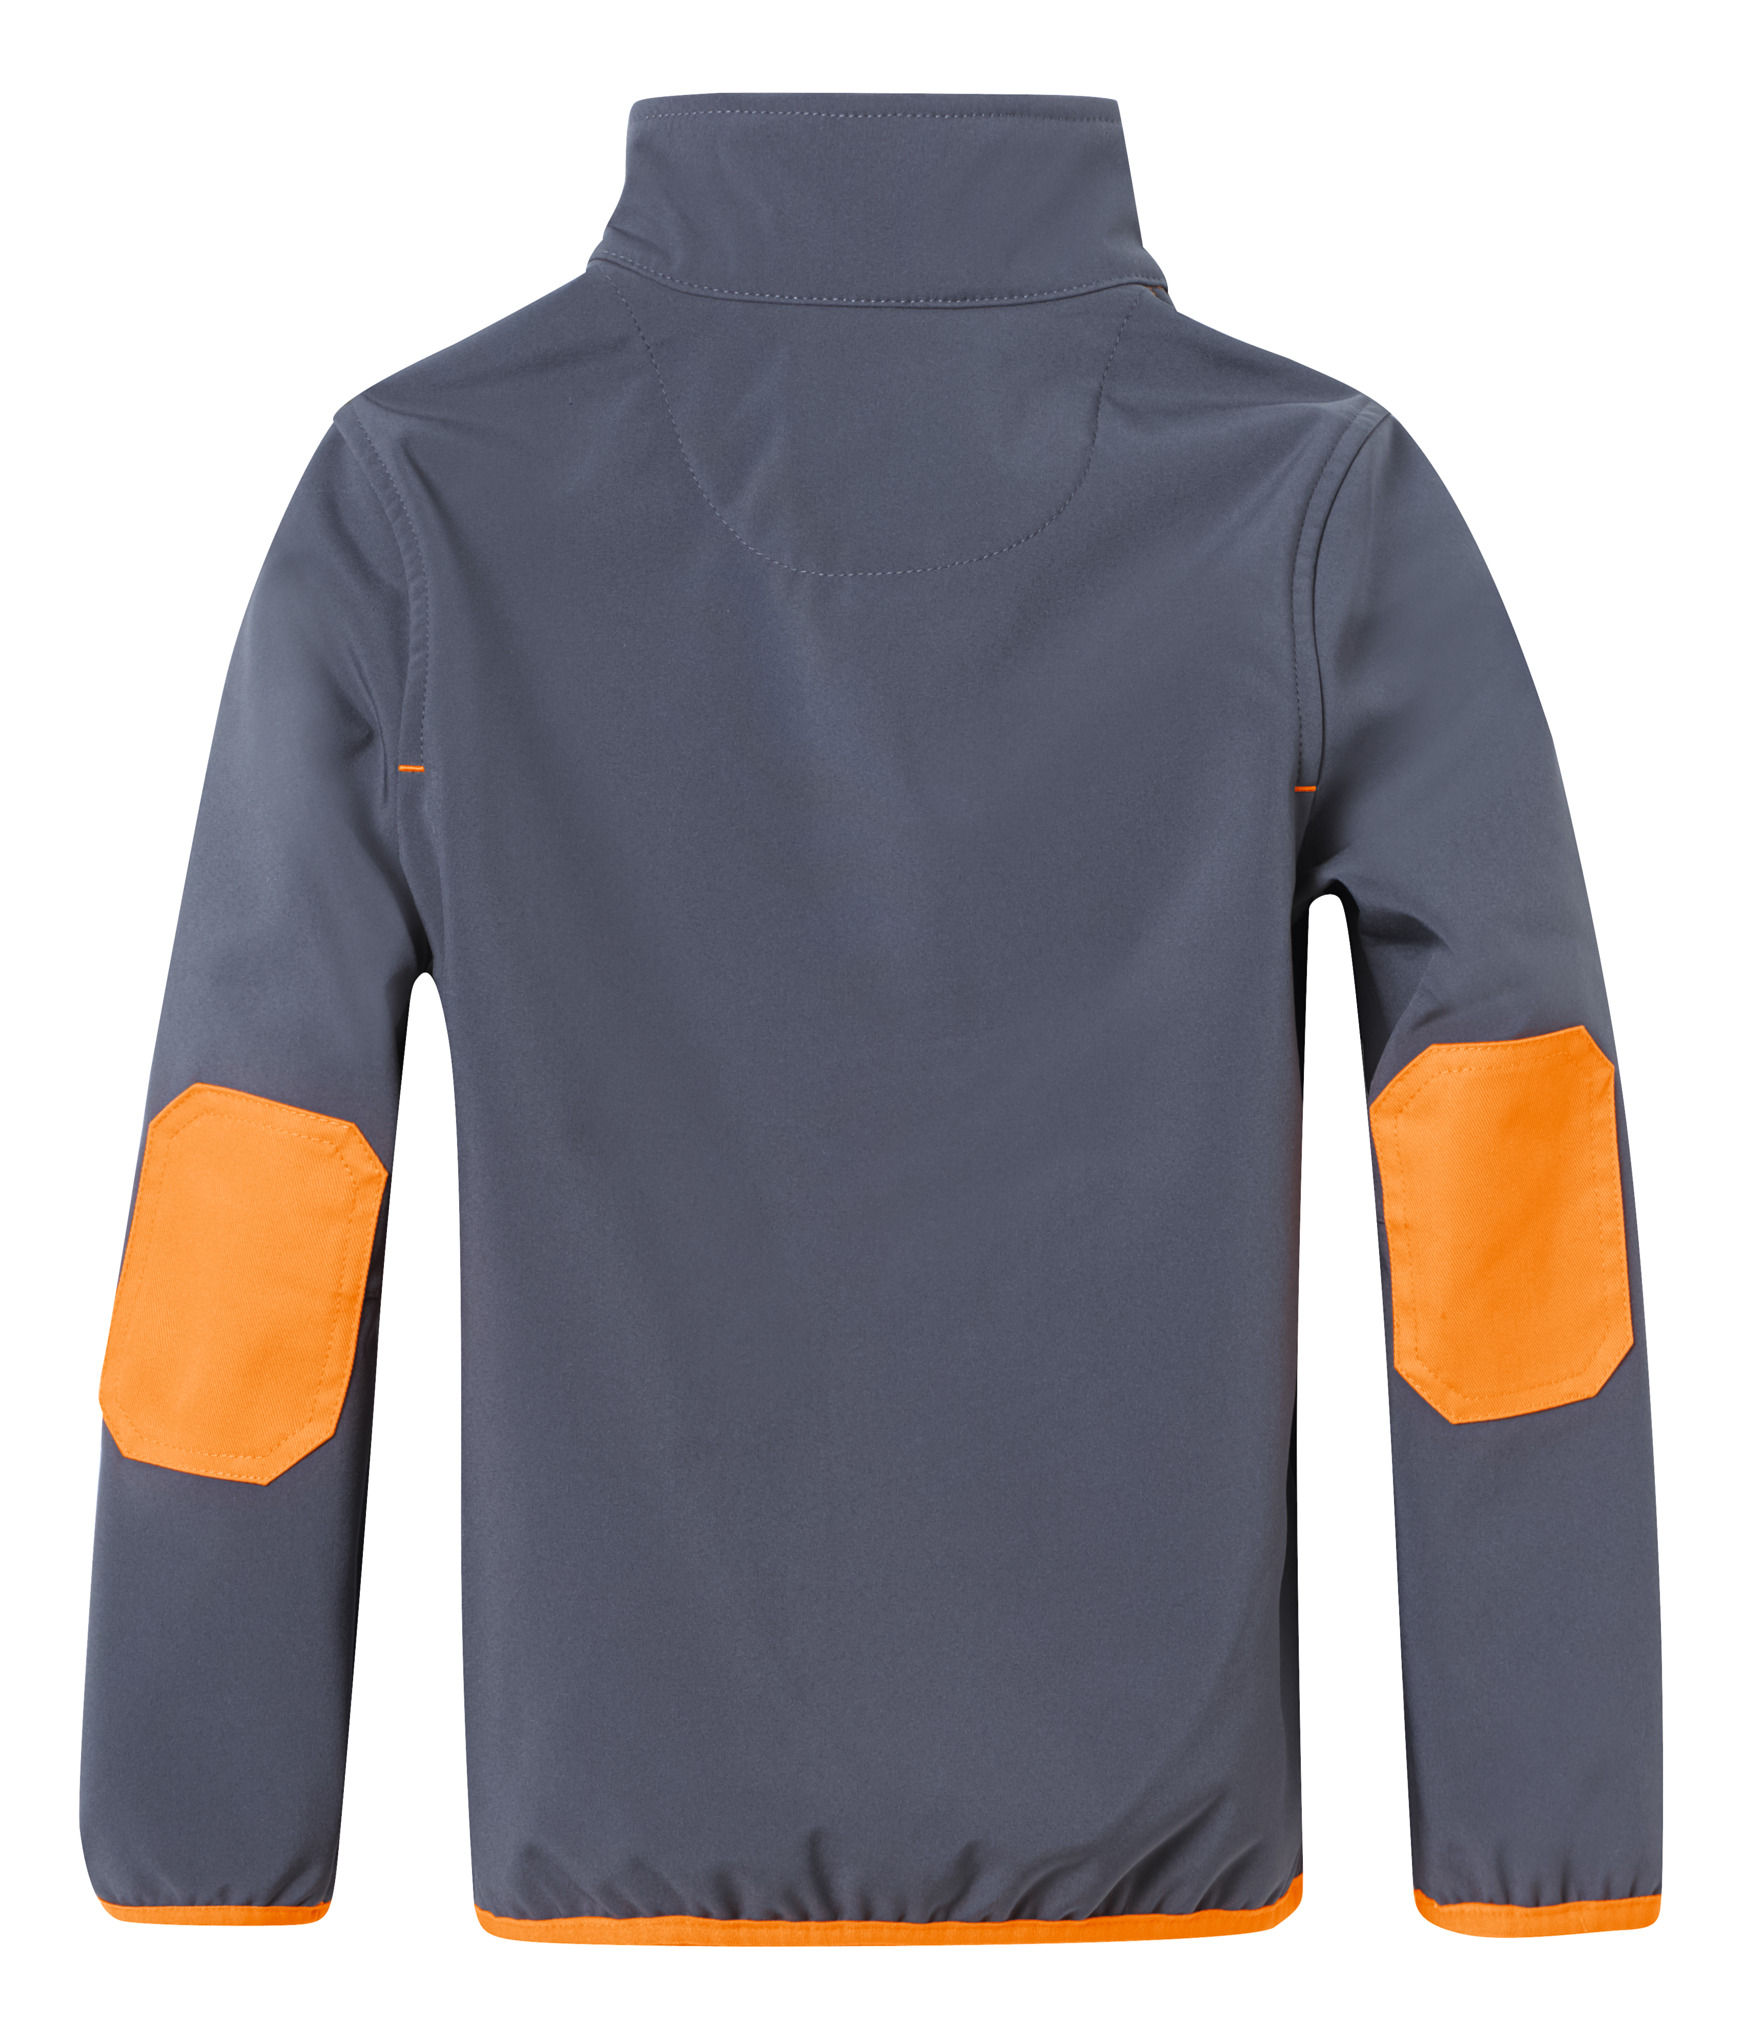 Veste softshell, taille